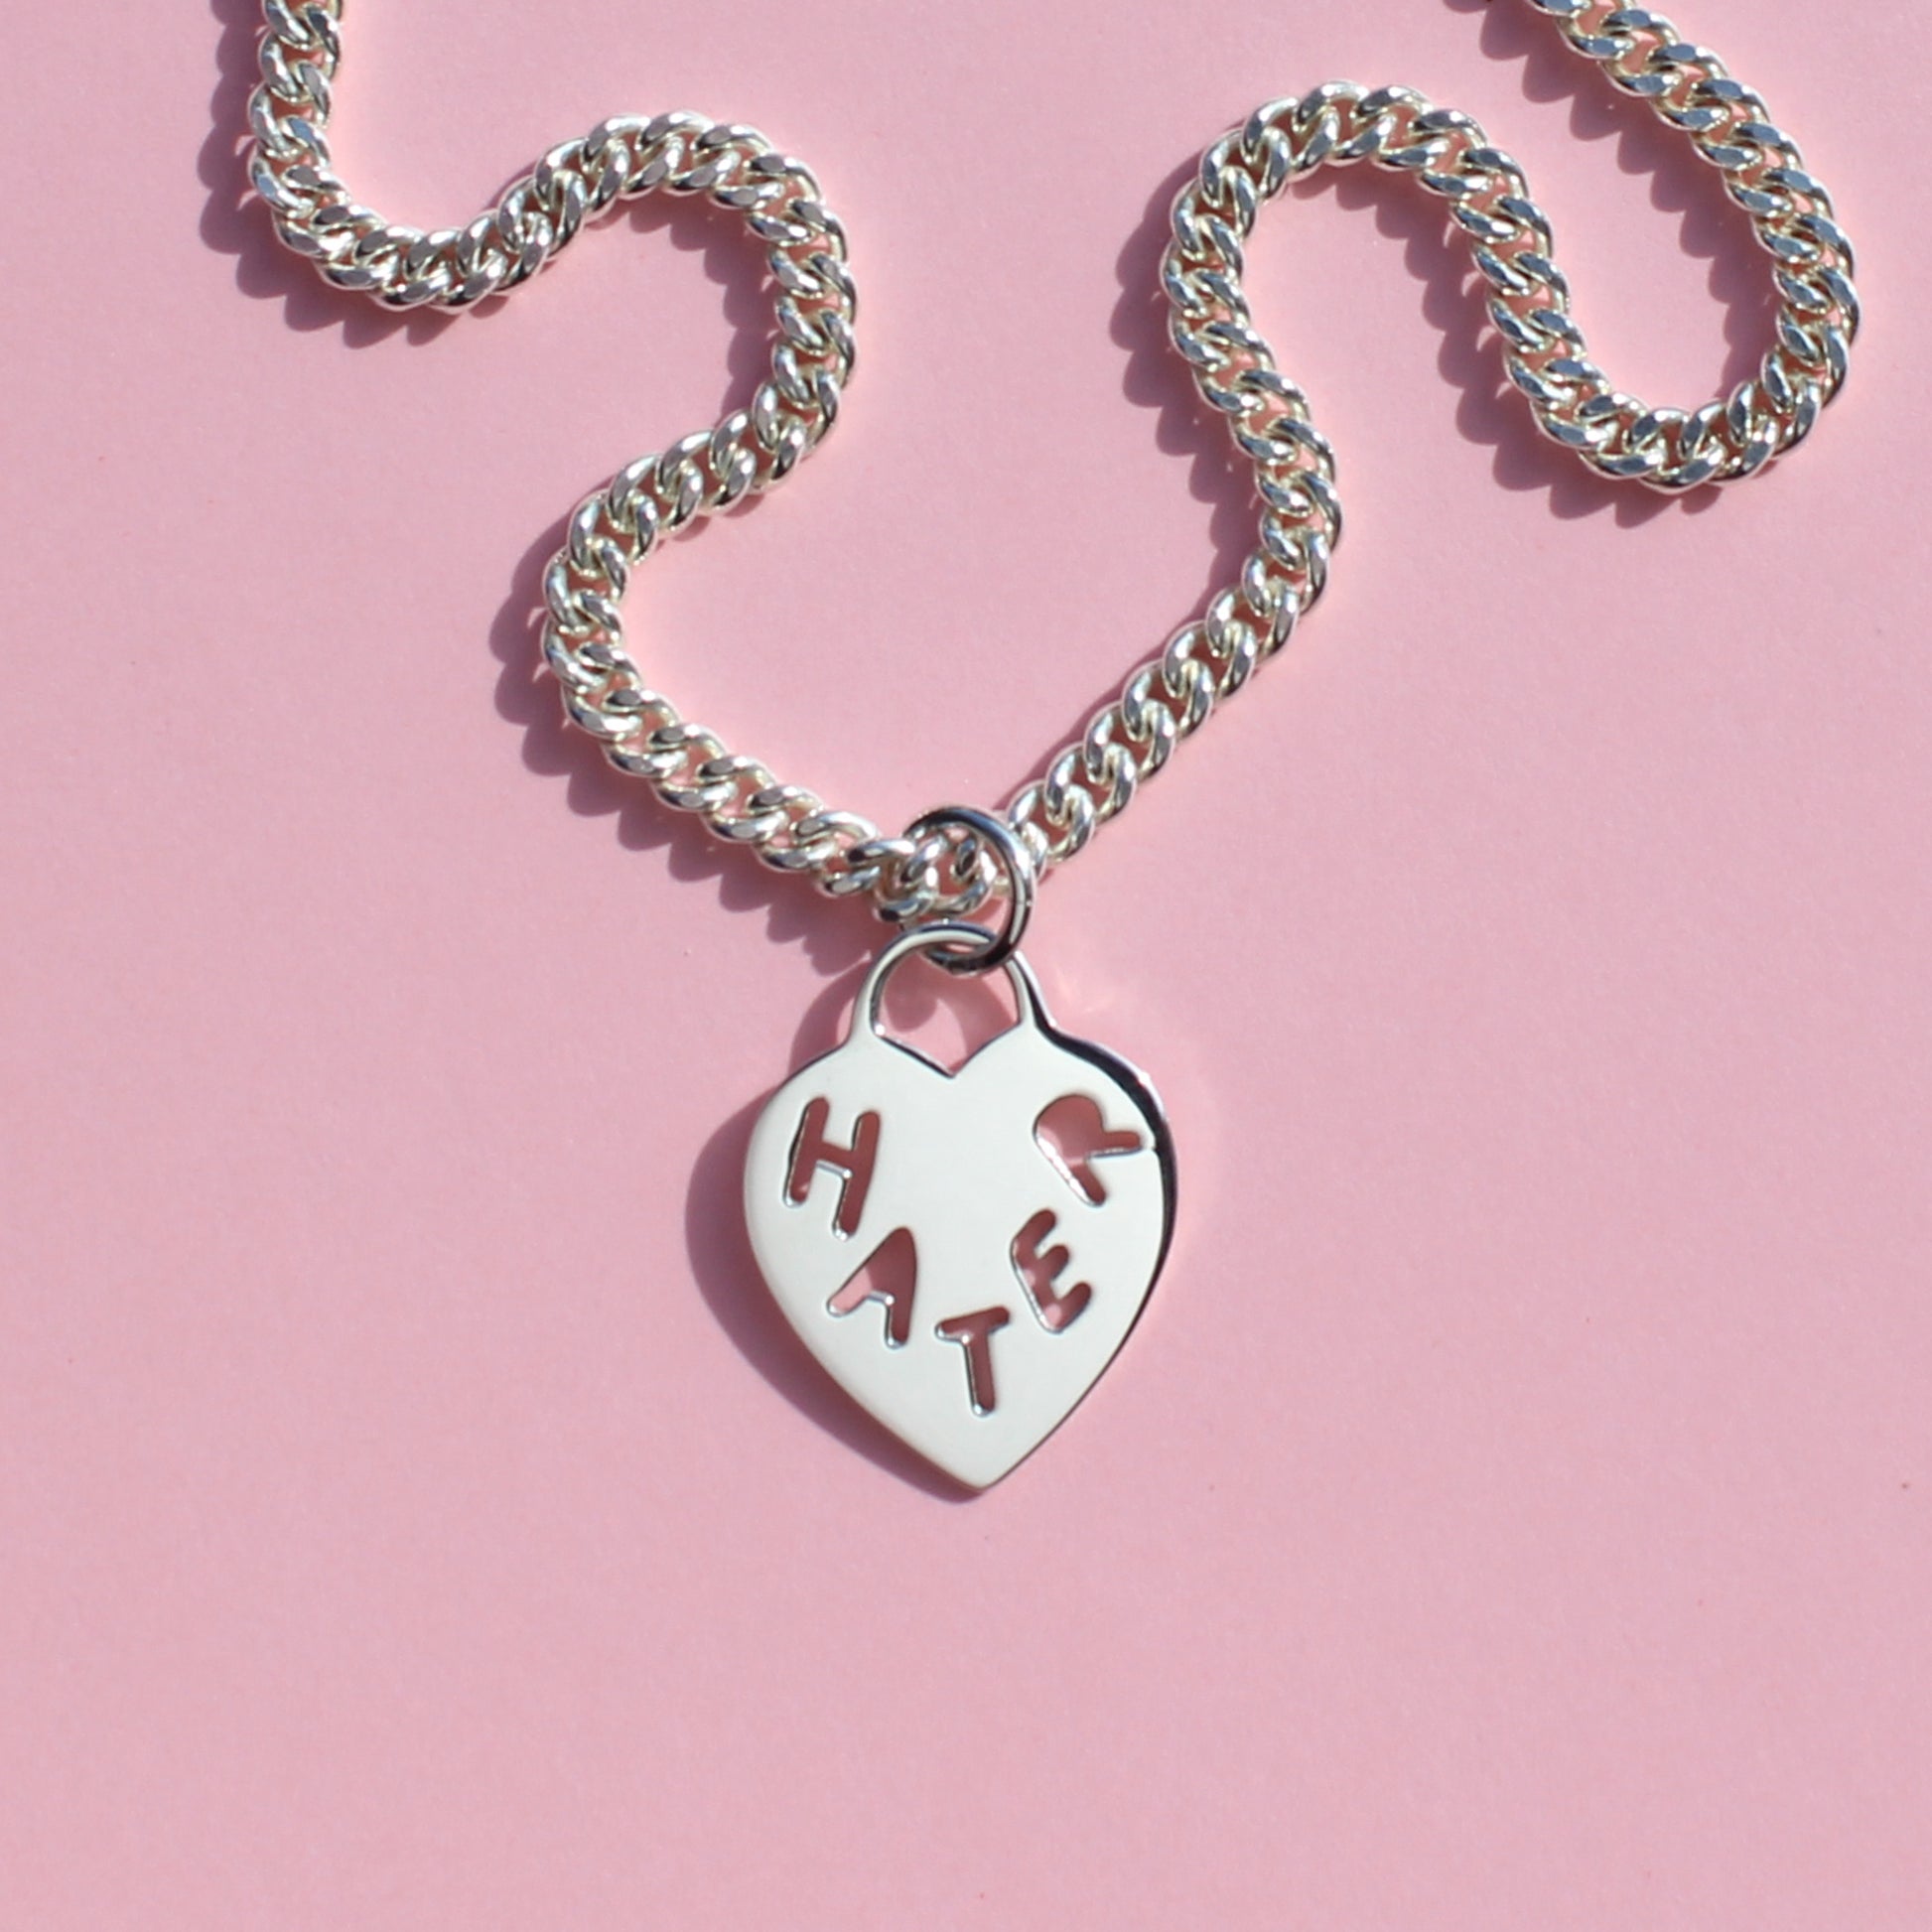 Return to Tiffany® Heart Tag Necklace in Silver with a Diamond, Medium |  Tiffany & Co.